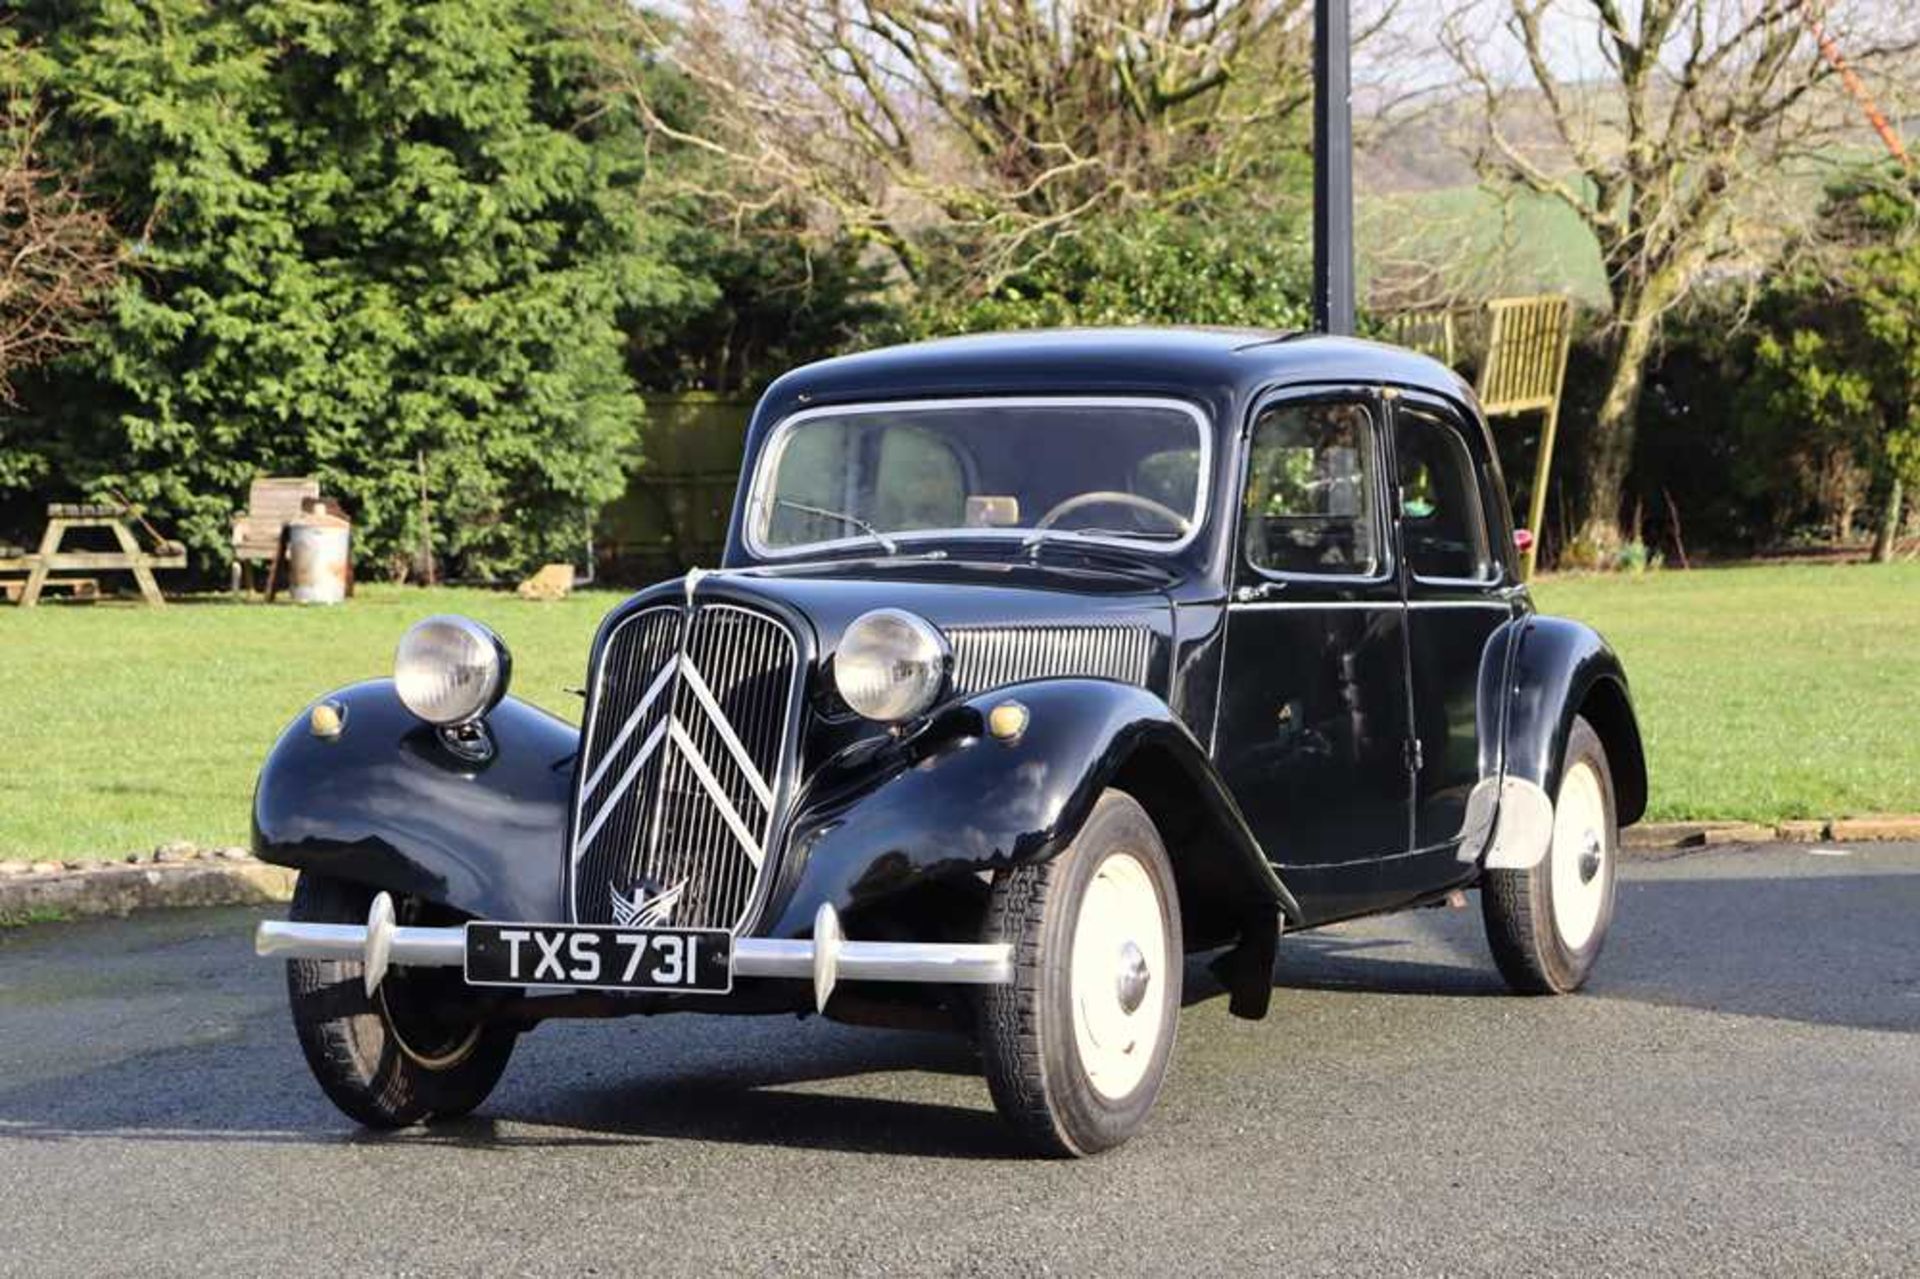 1952 Citroën 11BL Traction Avant In current ownership for over 40 years - Image 58 of 60